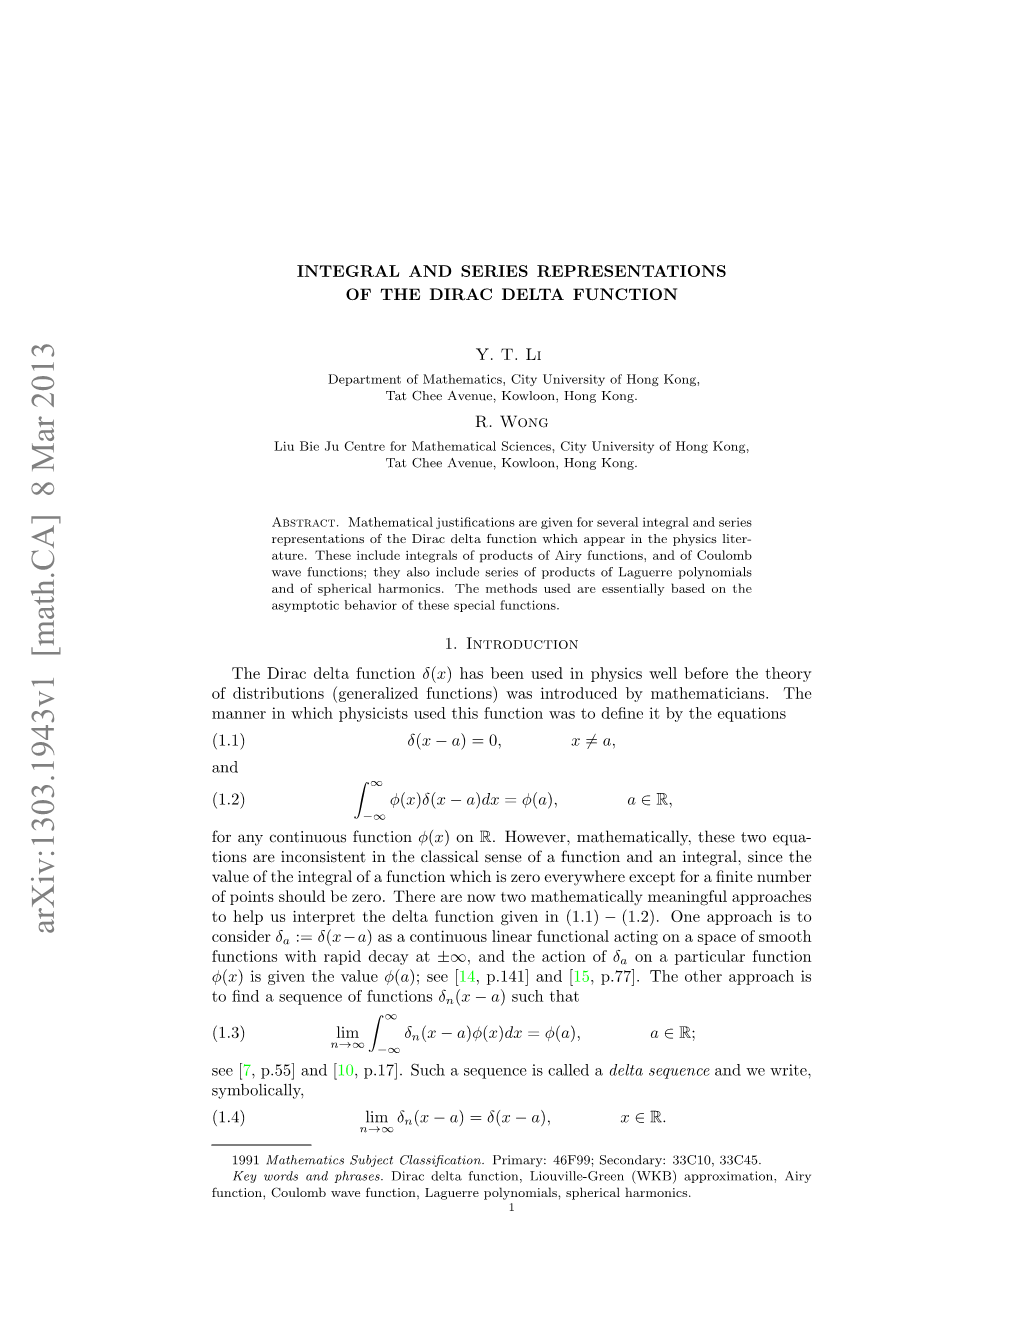 Integral and Series Representations of the Dirac Delta Function